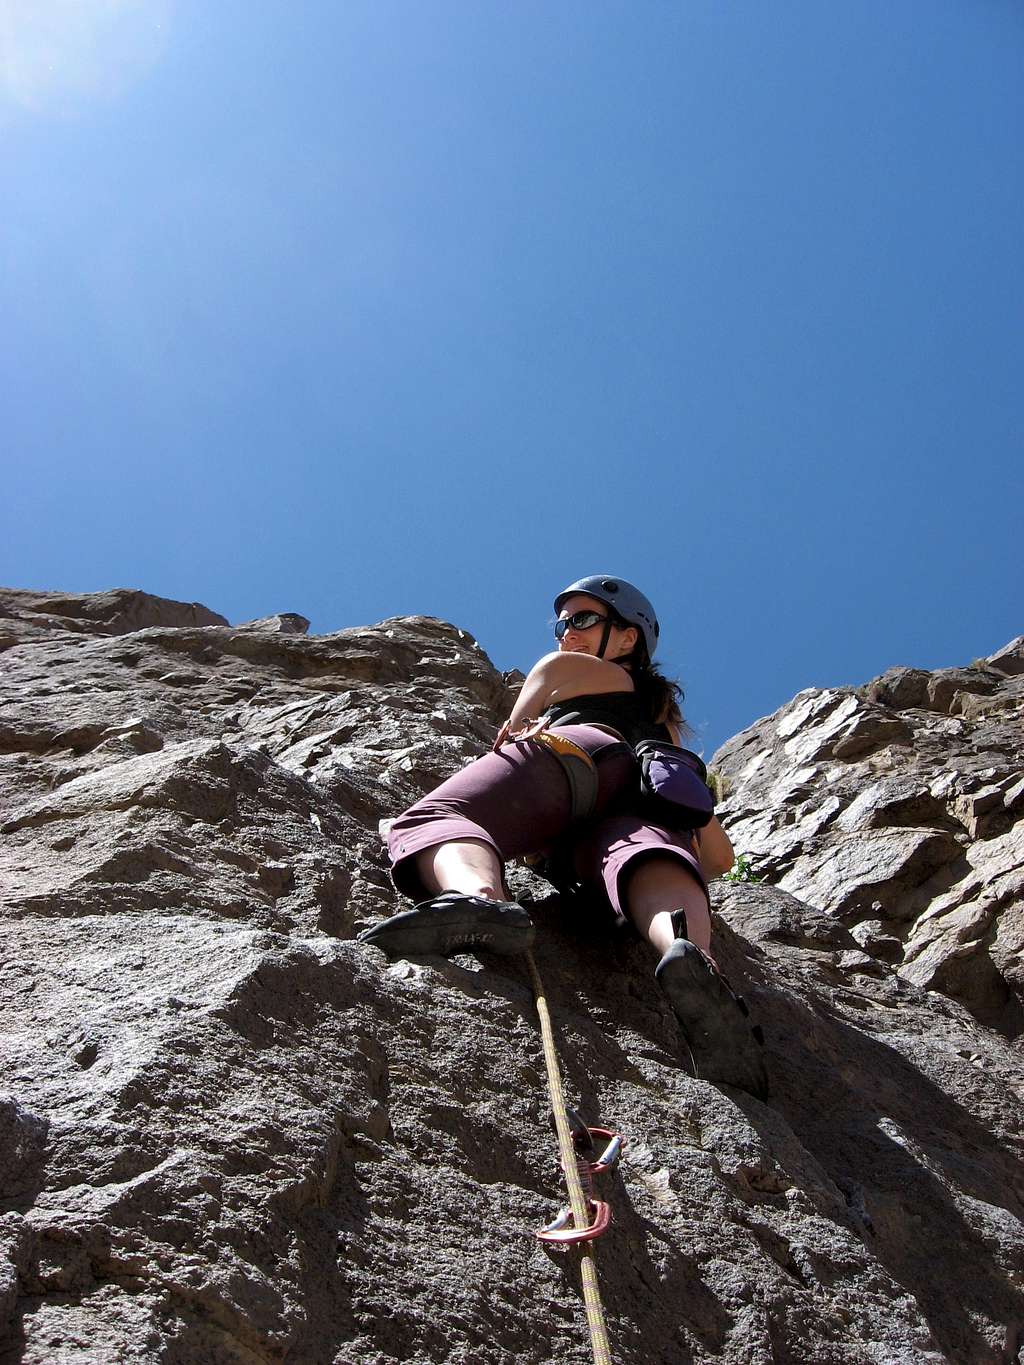 Climbing at the Owen's River Gorge